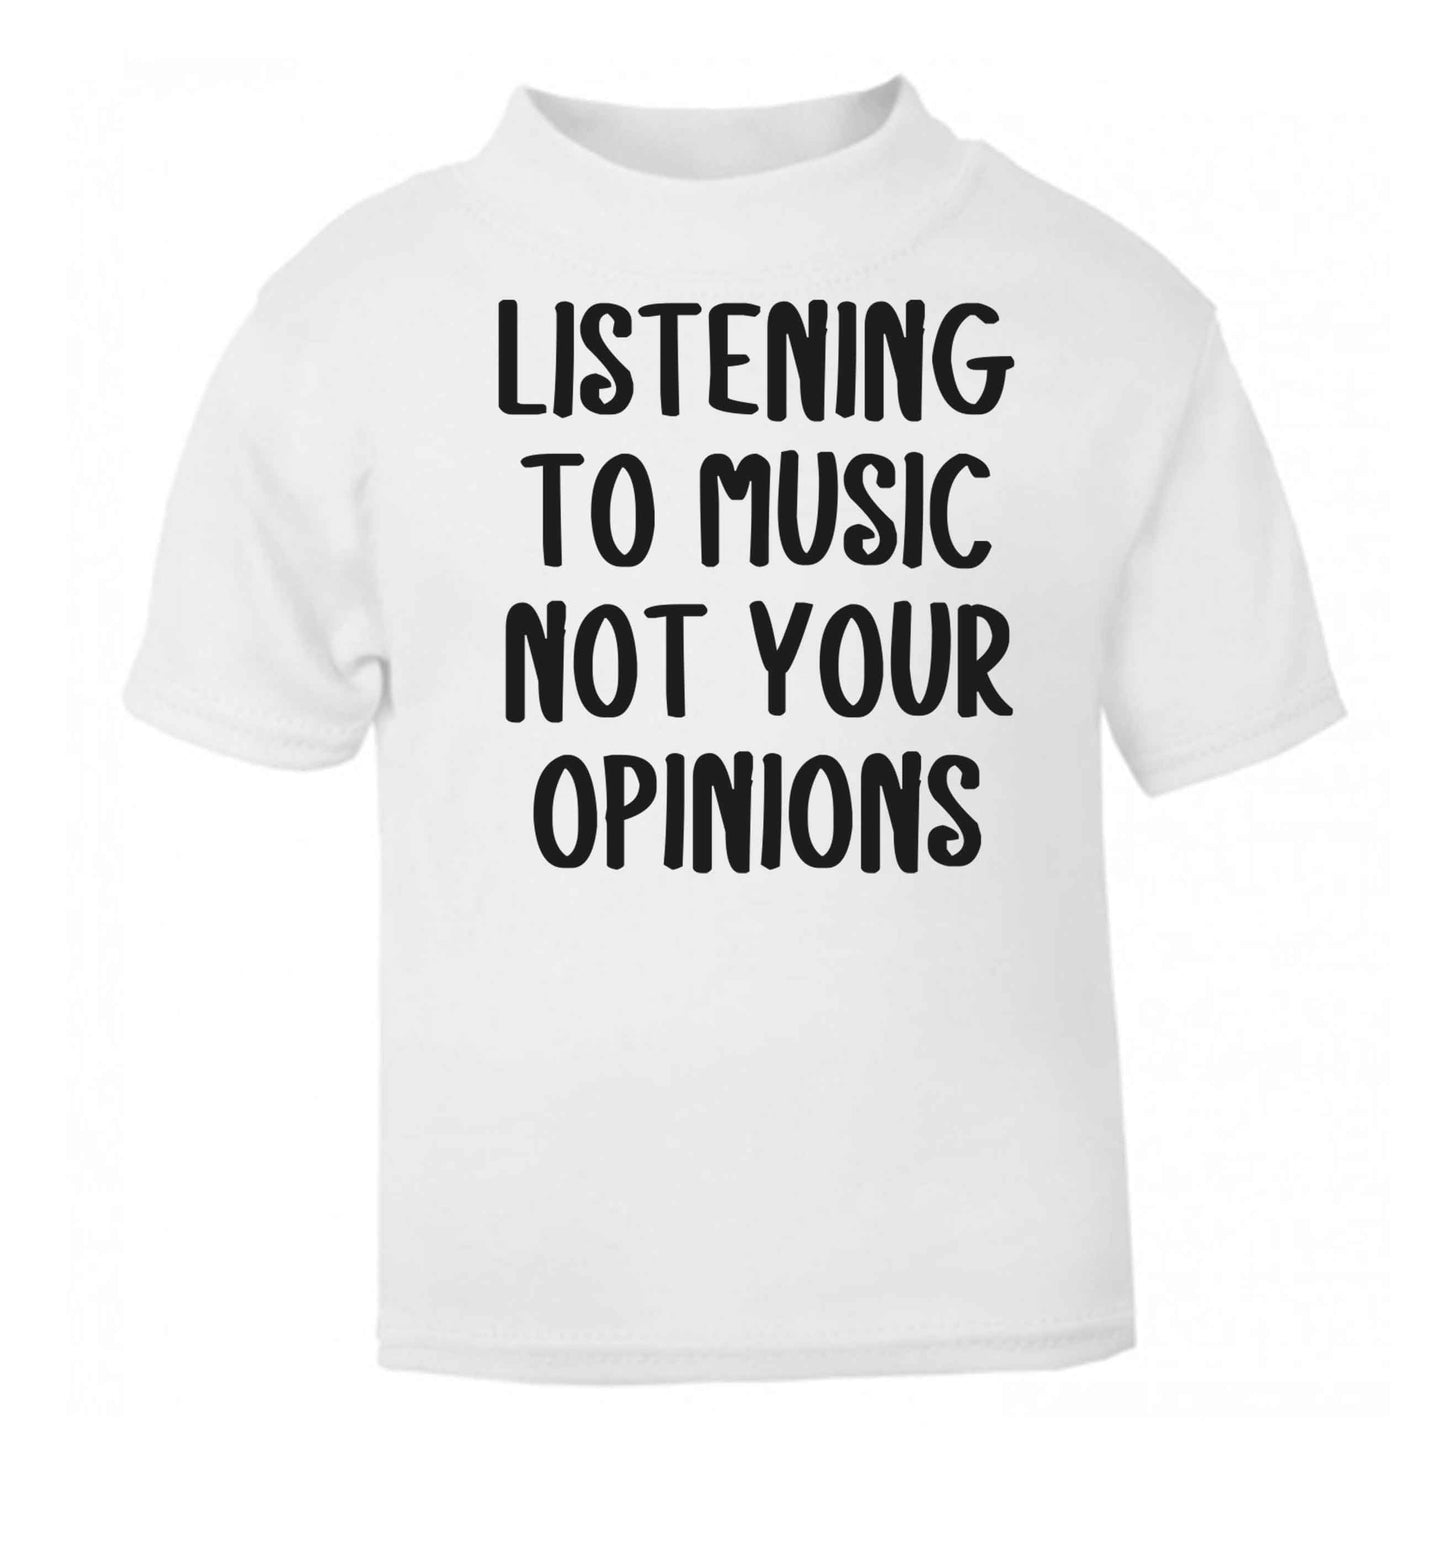 Listening to music not your opinions white baby toddler Tshirt 2 Years